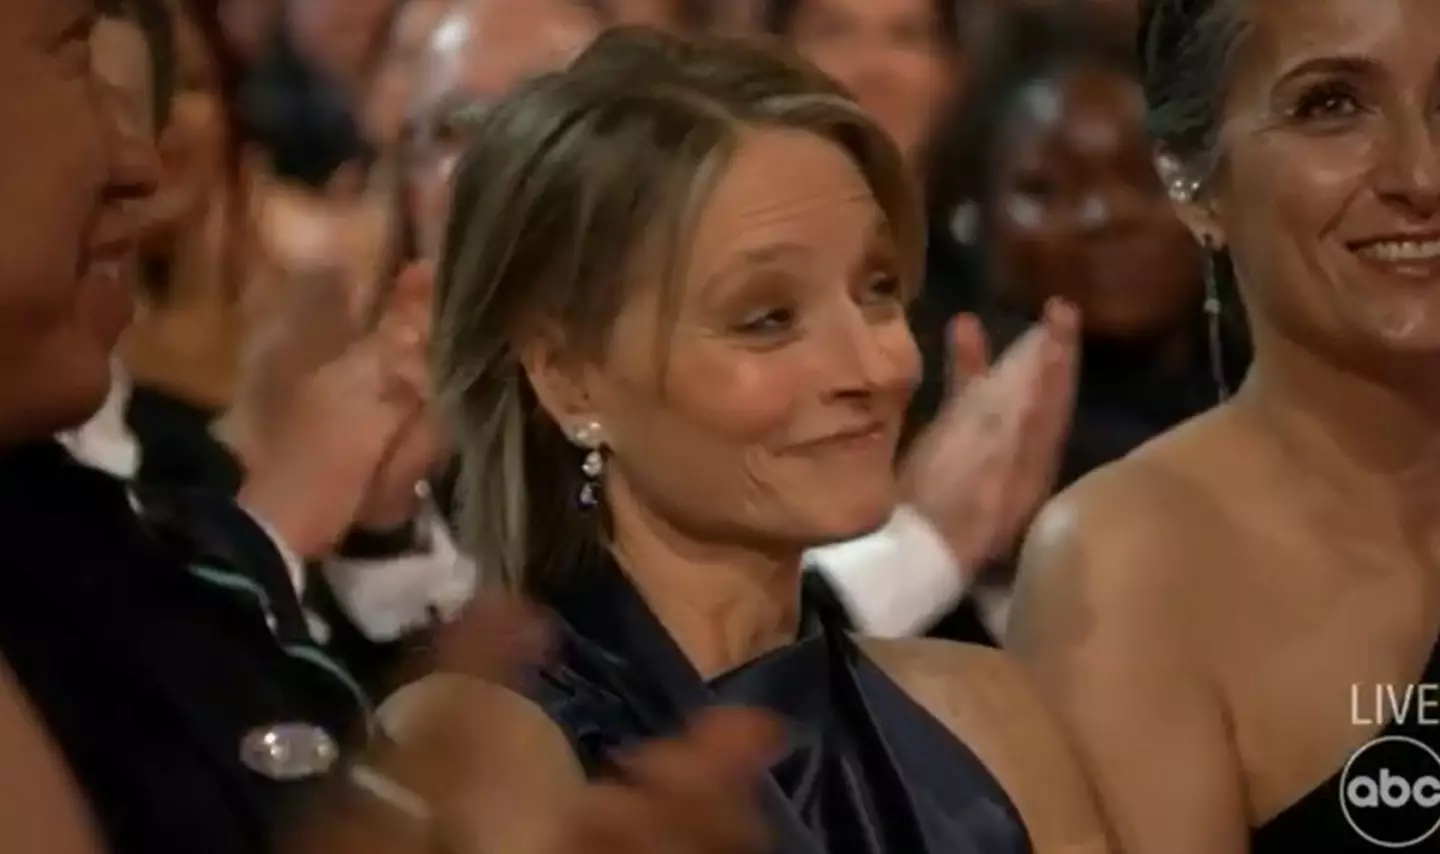 Jodie Foster could be seen laughing and nodding her head at the Los Angeles venue.